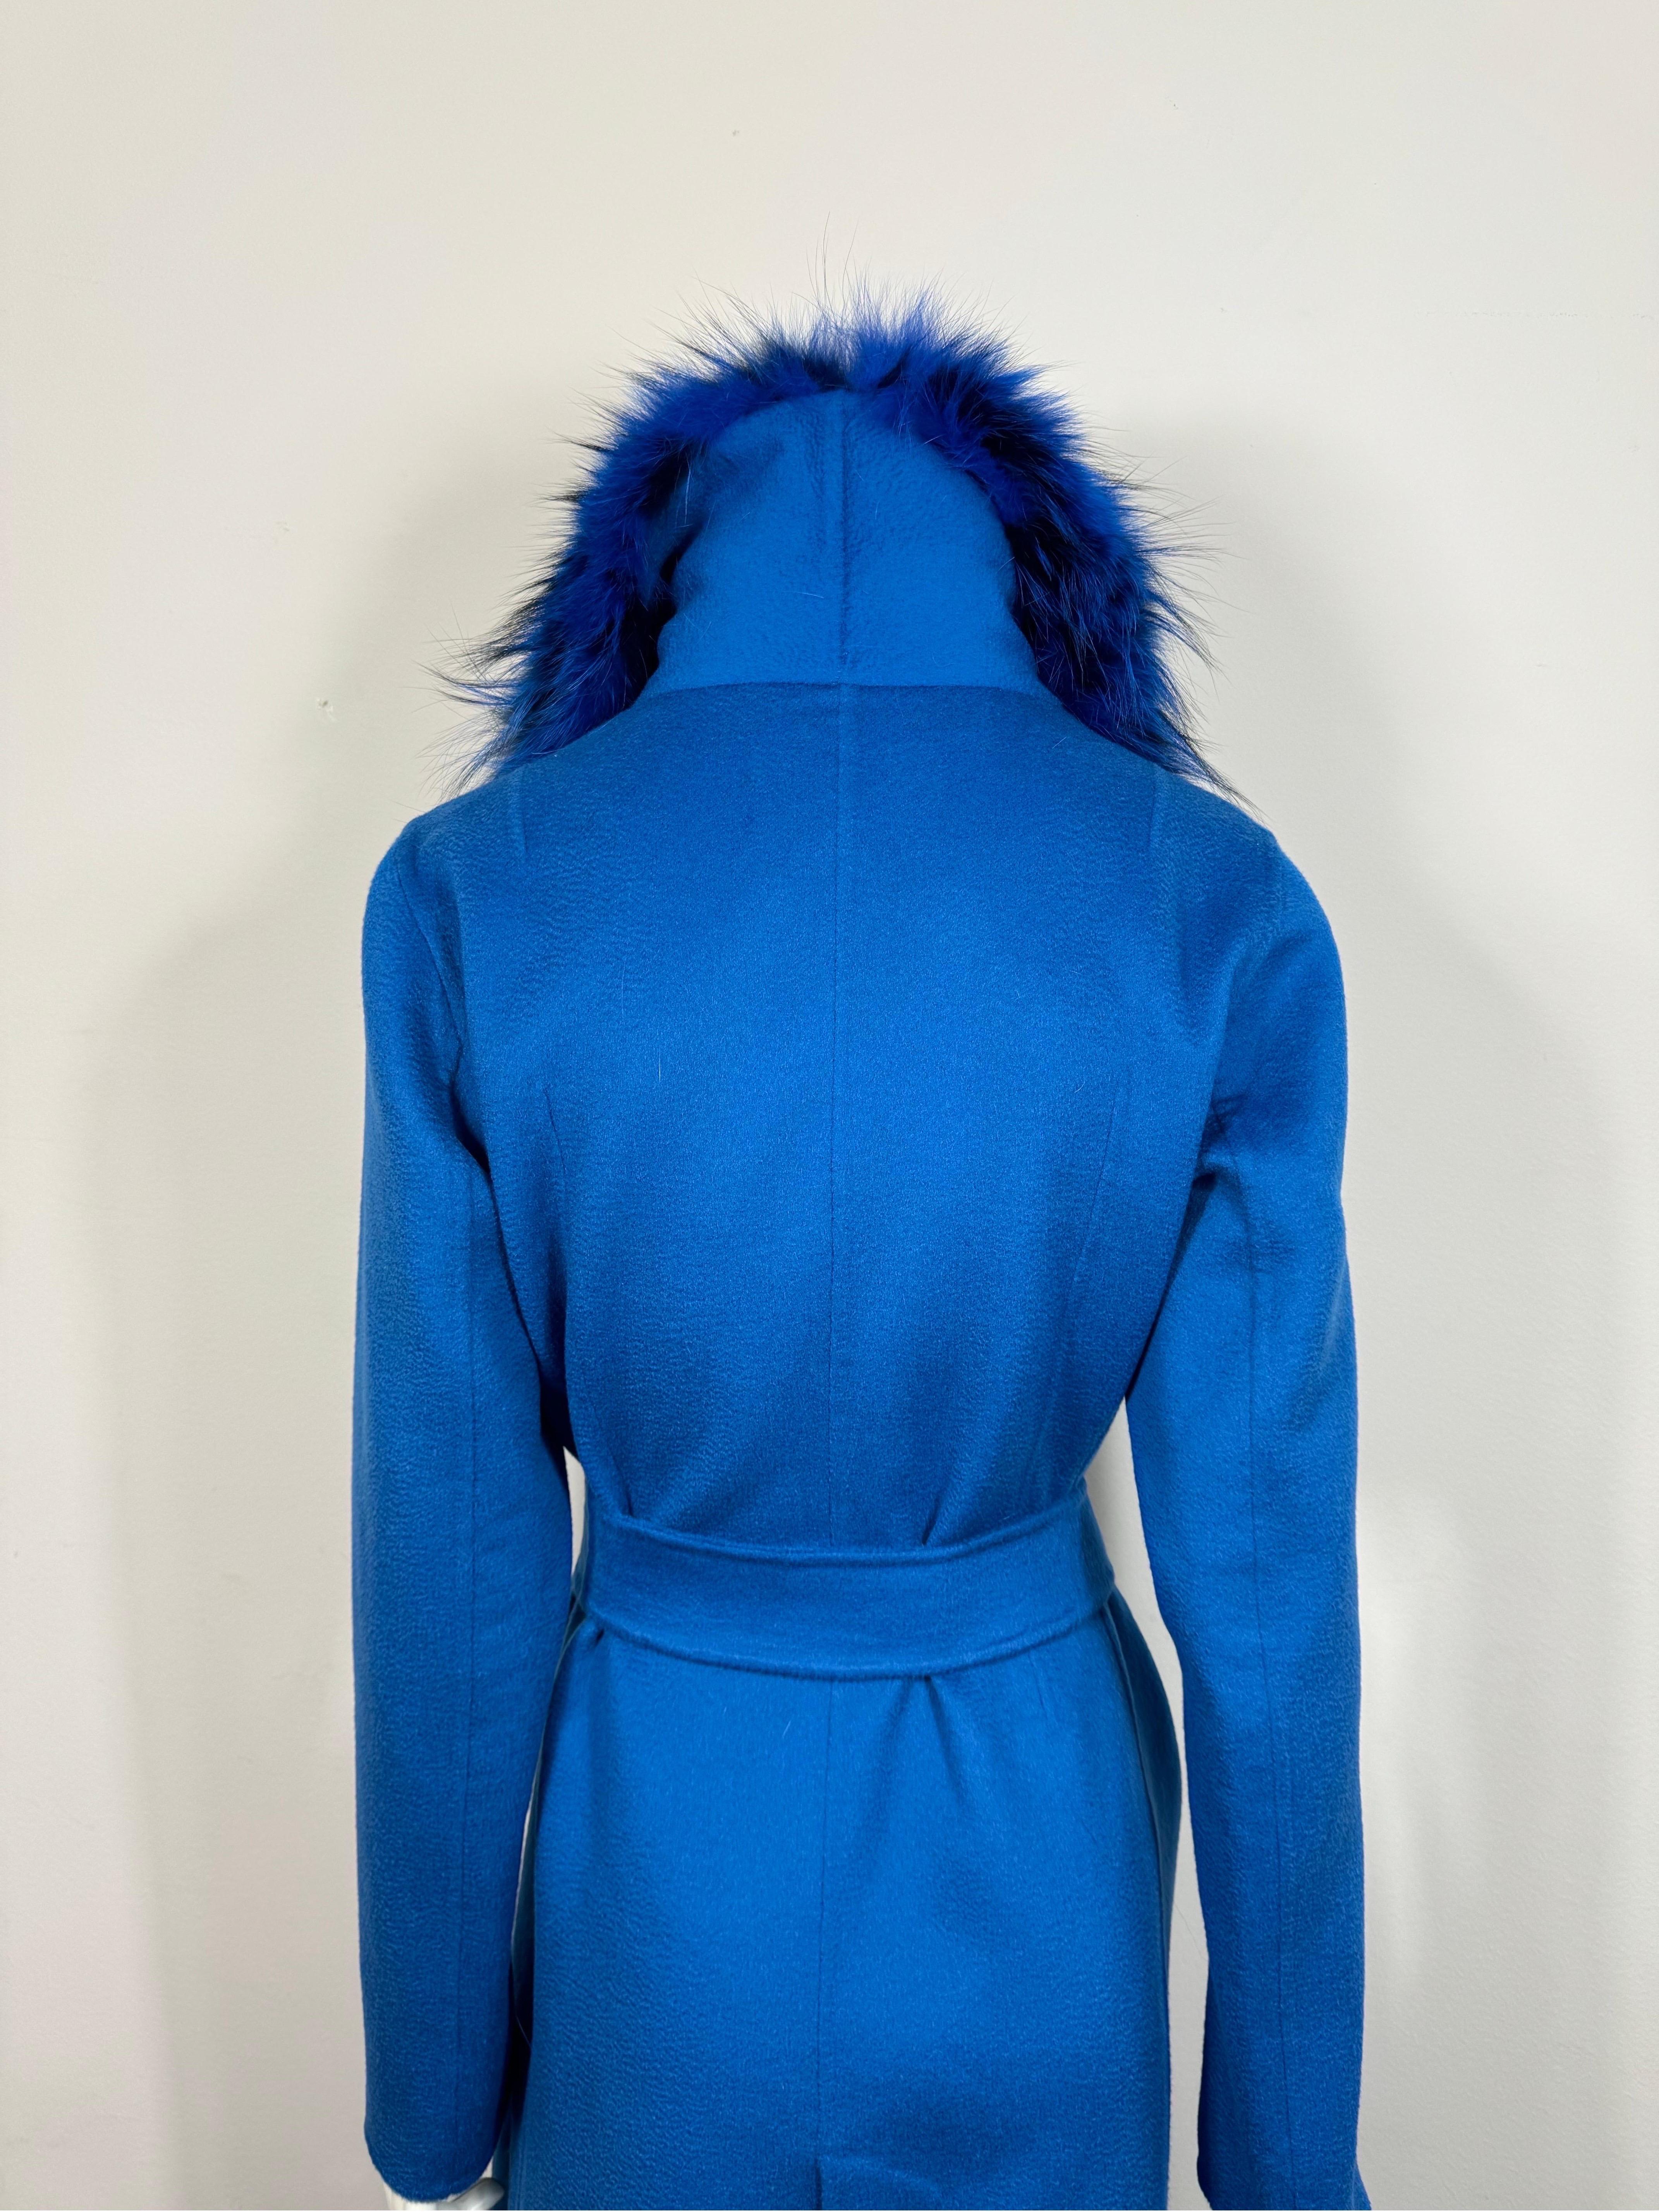 J Mendel Runway Fall 2016 Azure Cashmere Coat with Fox Fur Collar-Size Small-NWT For Sale 7